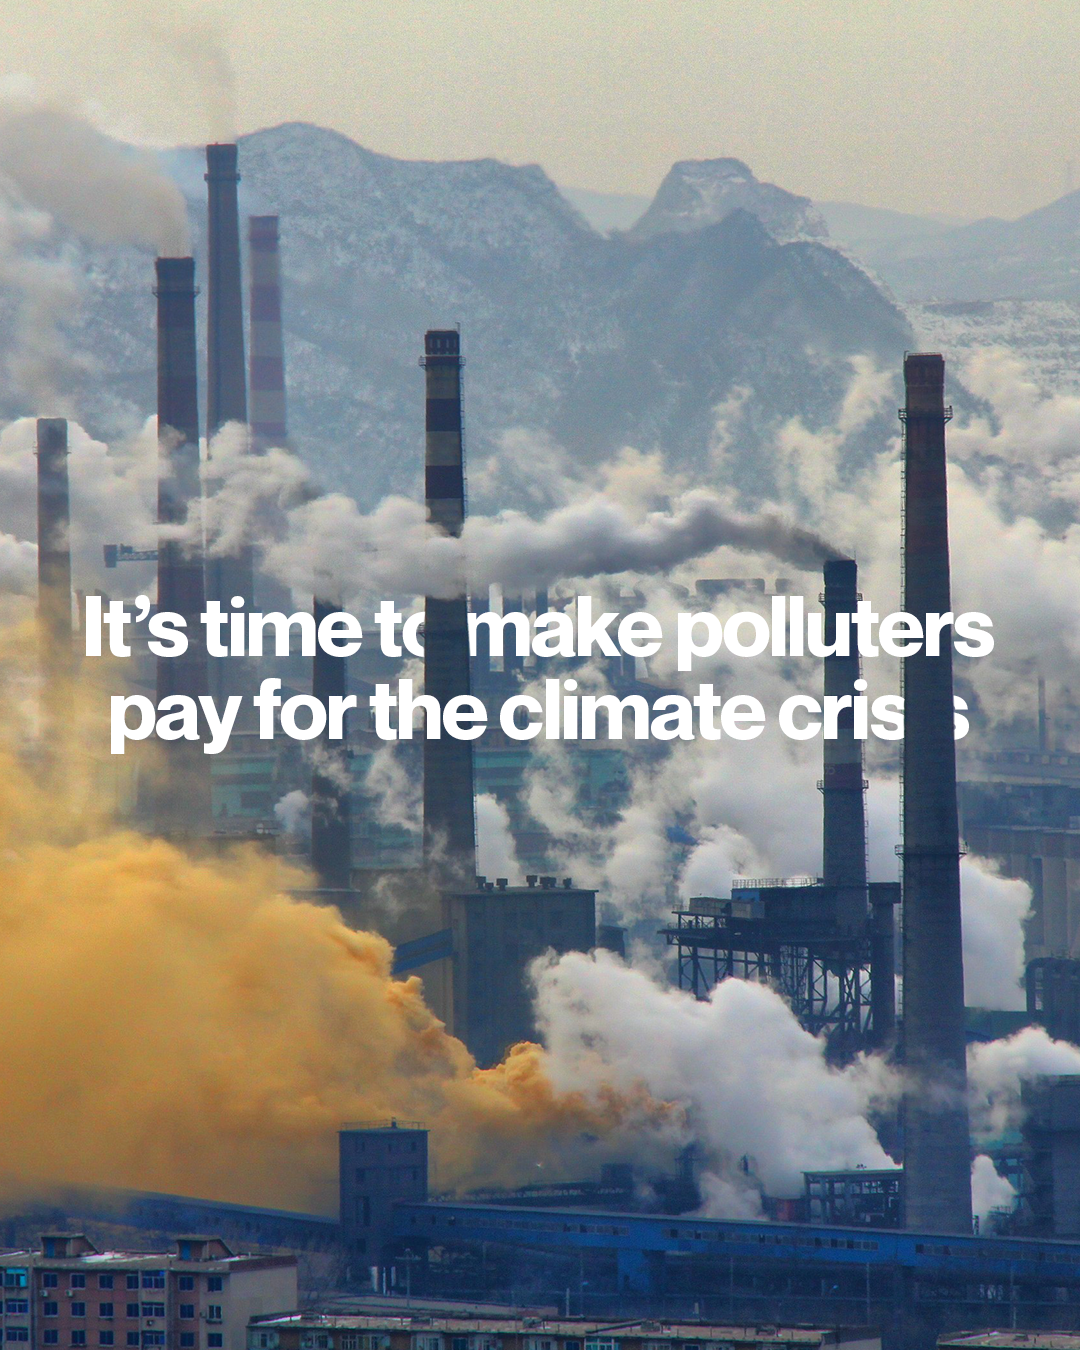 Image of smoking chimneys. Text reads it's time to make polluters pay for the climate crisis.